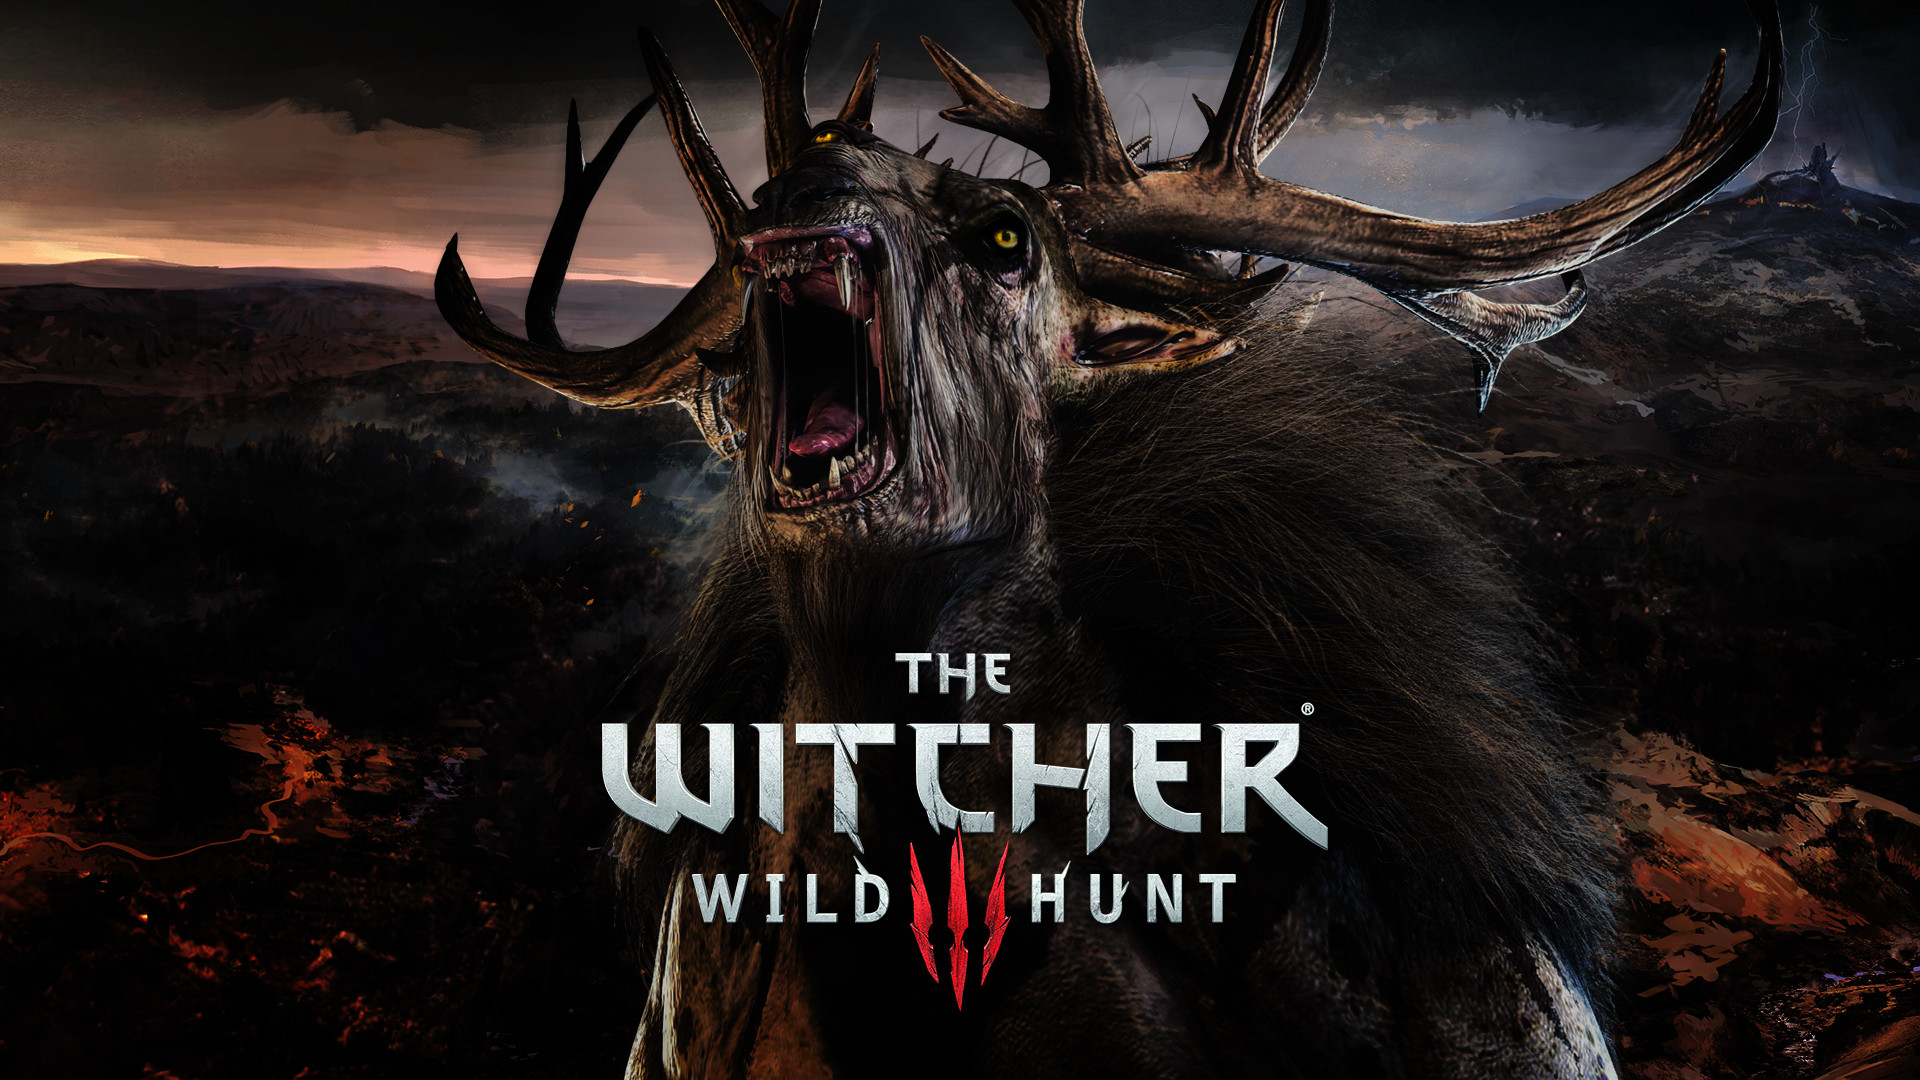 The Witcher 3 - Witcher Wild Hunt 3 Monster - HD Wallpaper 